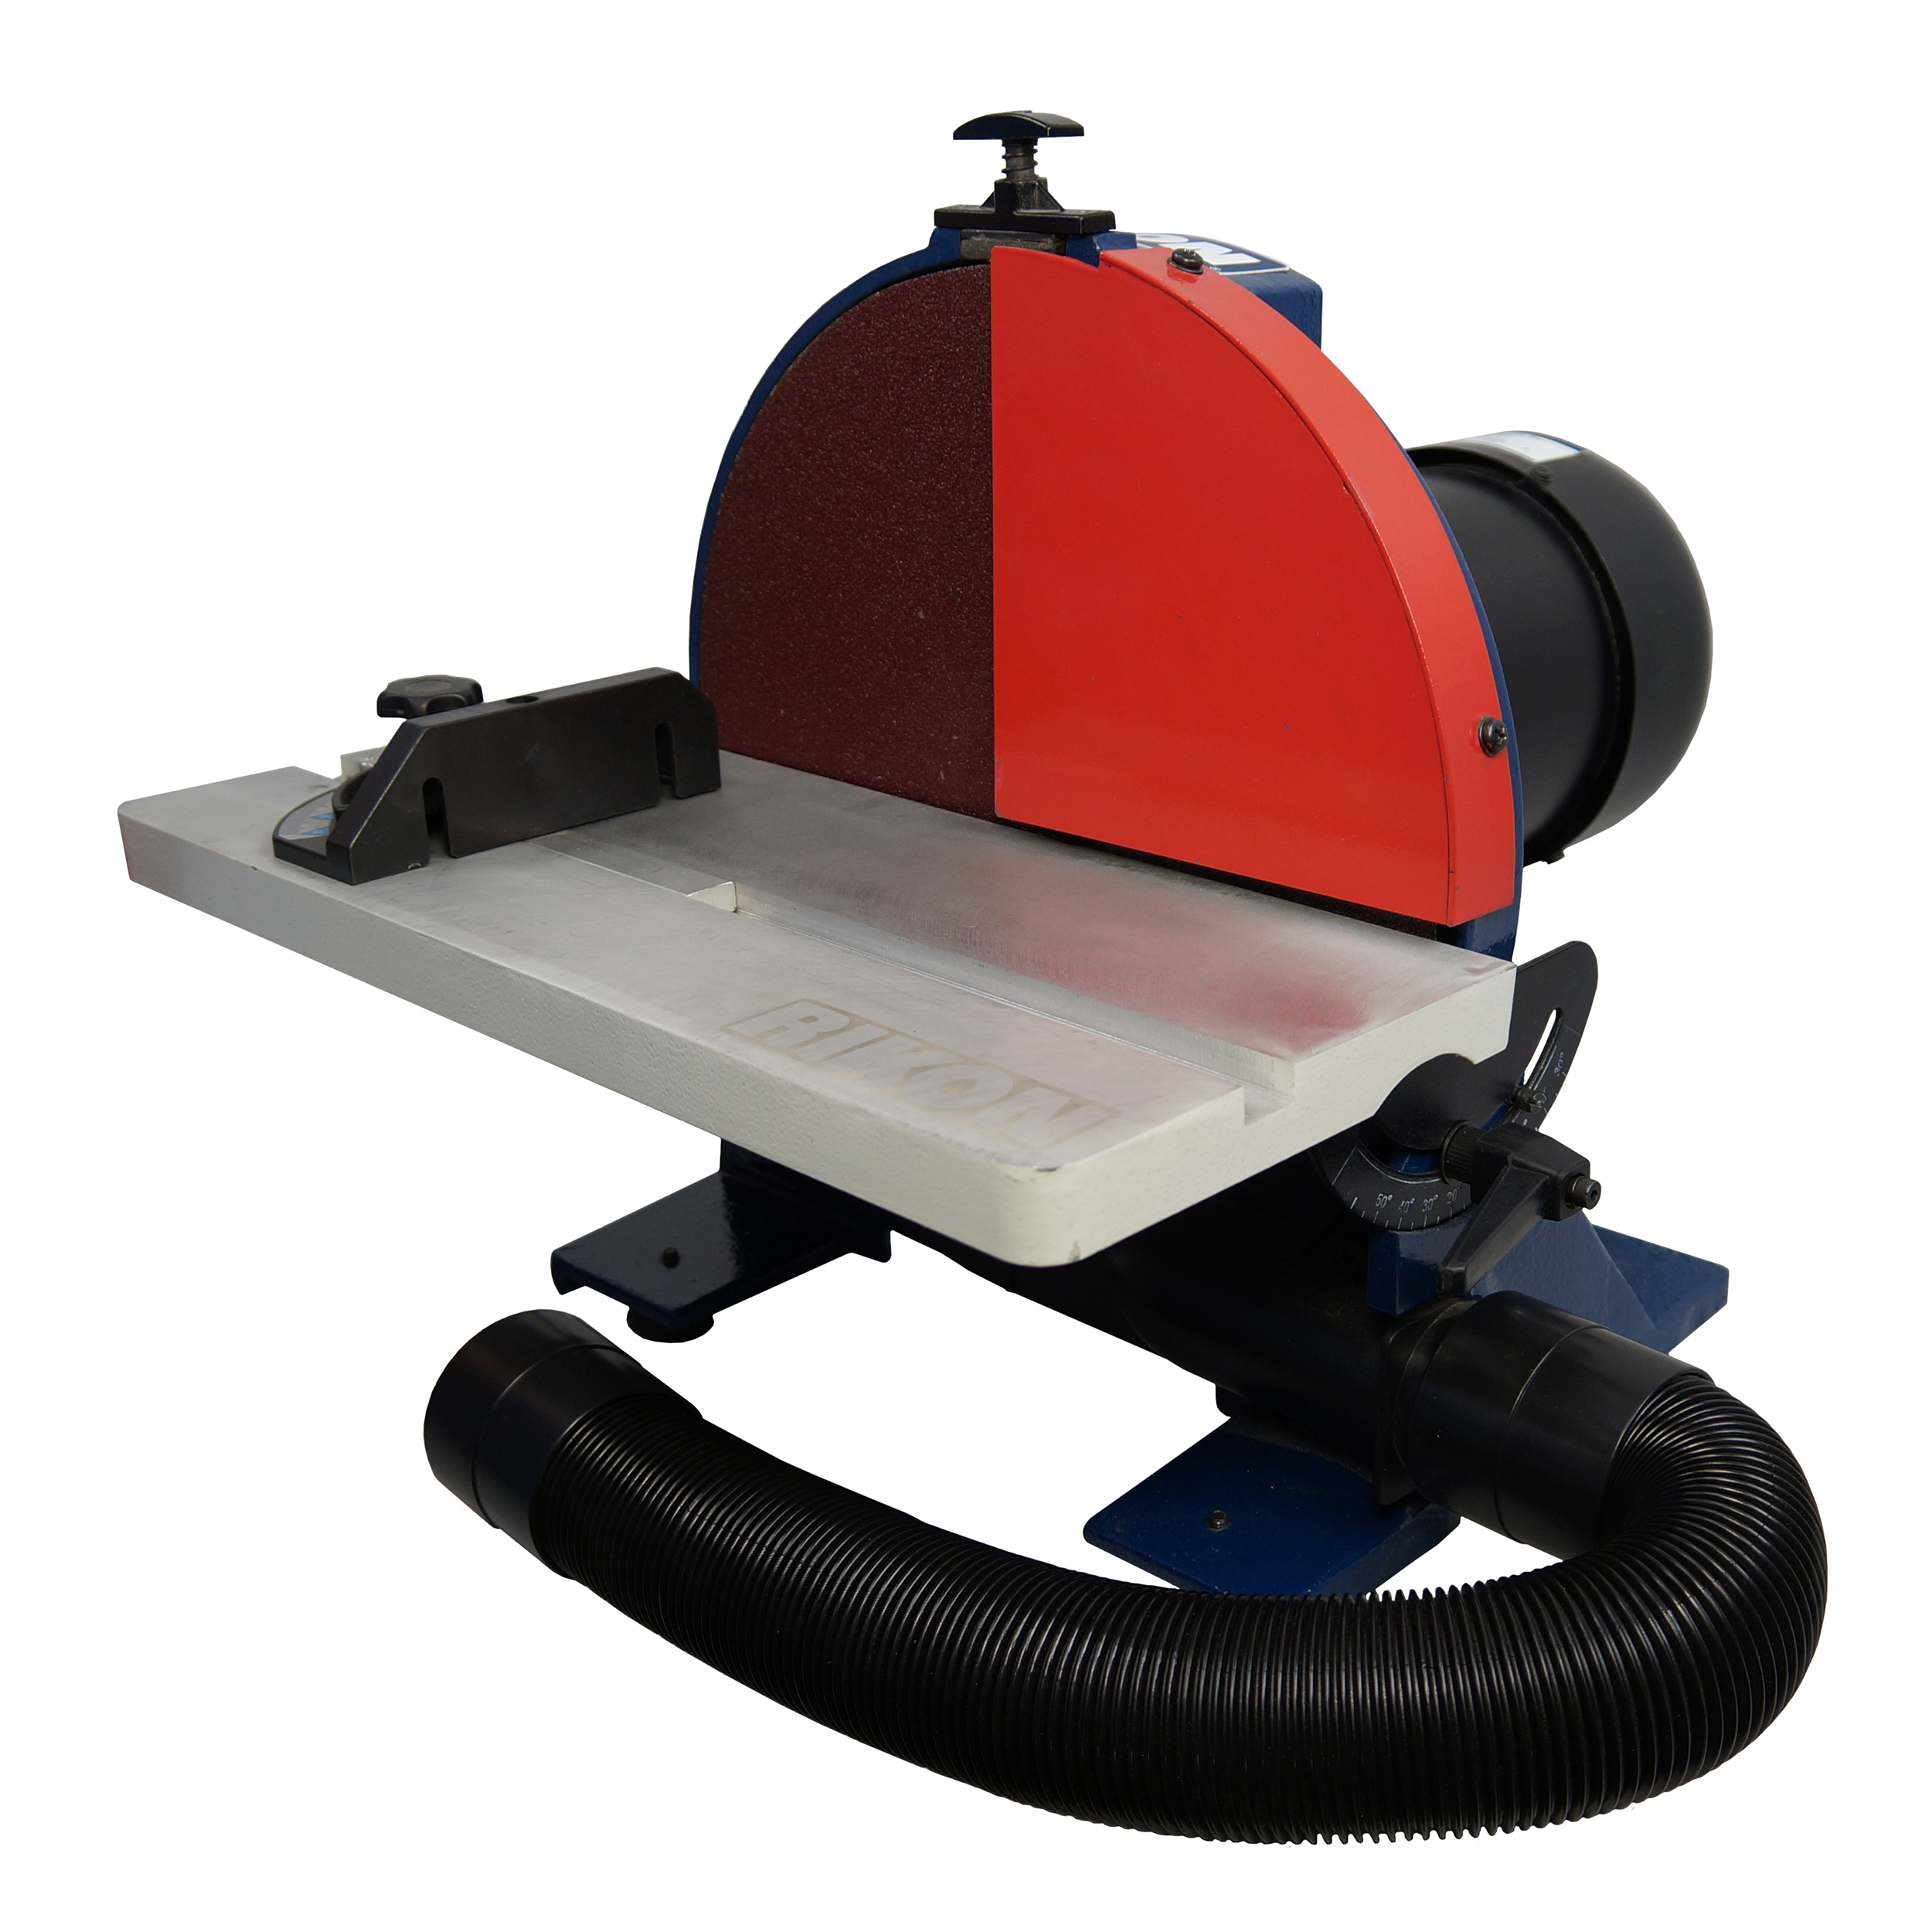 12" Disc Sander, 1.25hp, With Guard And Dust Hose, 51-202